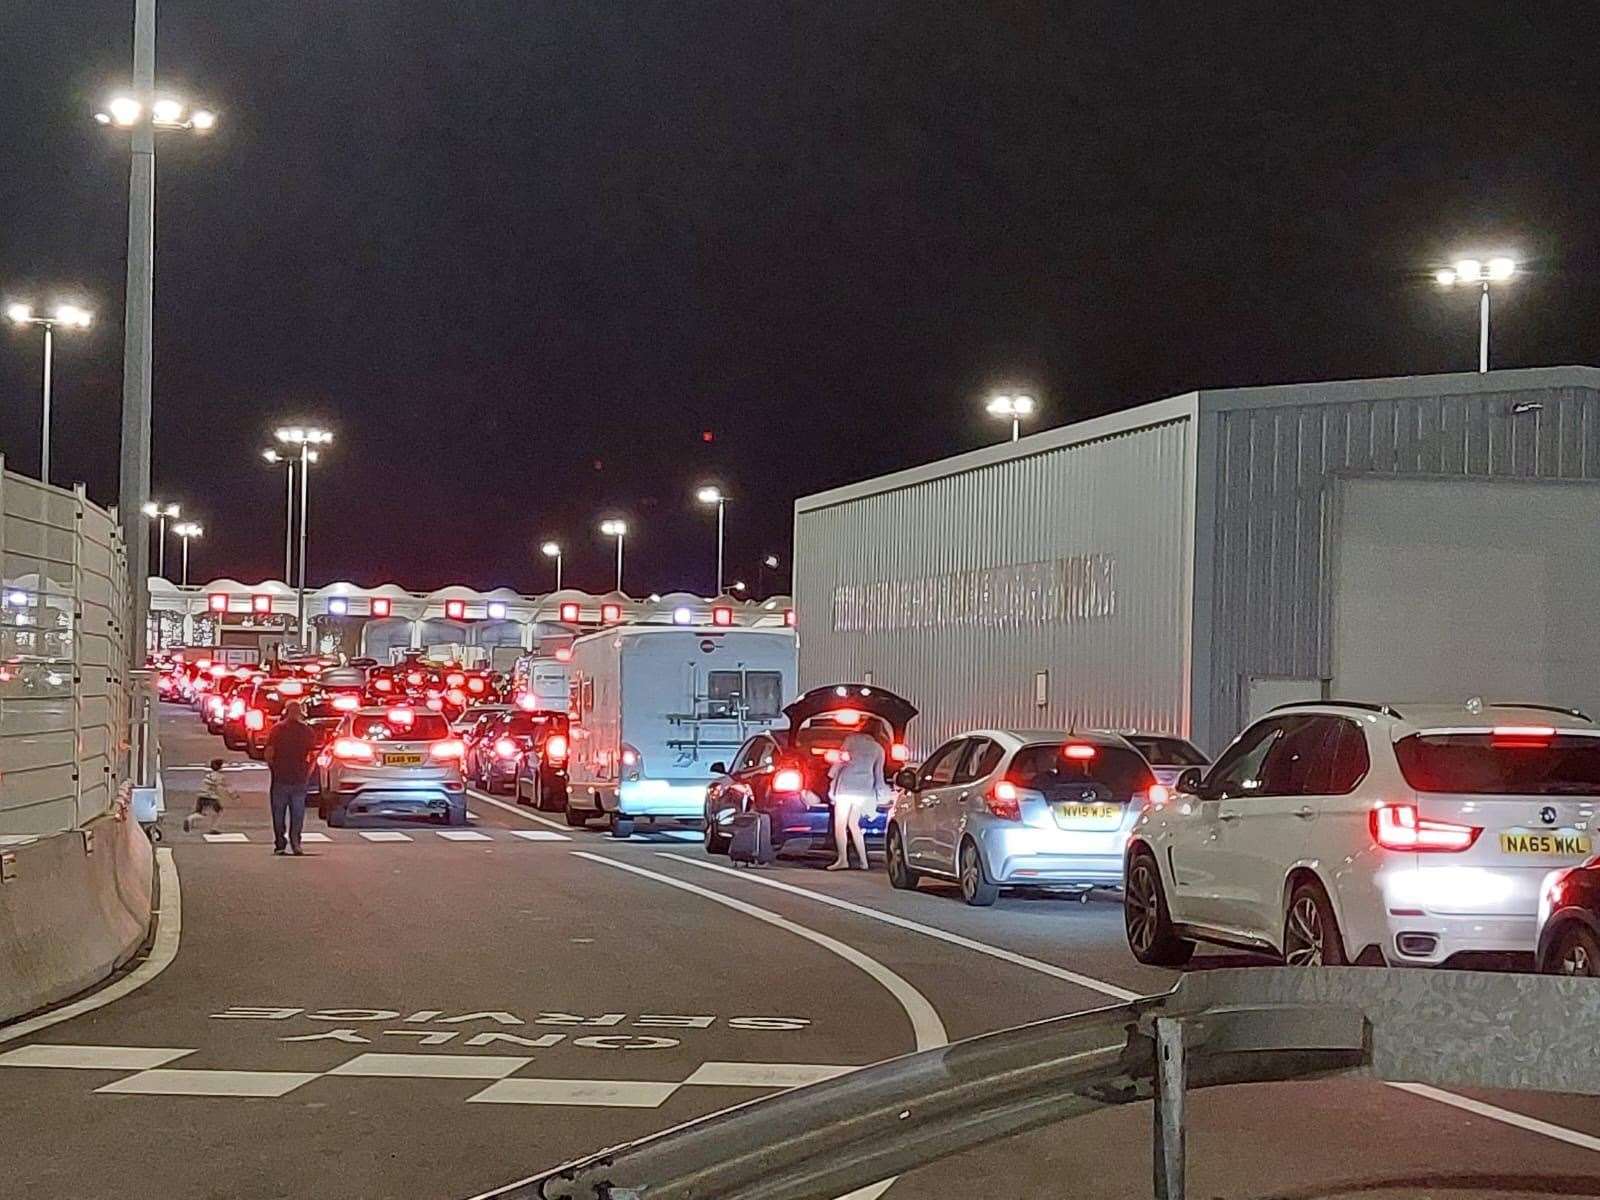 Delays at the border controls in Calais. Picture: @nonsocucinare on Twitter